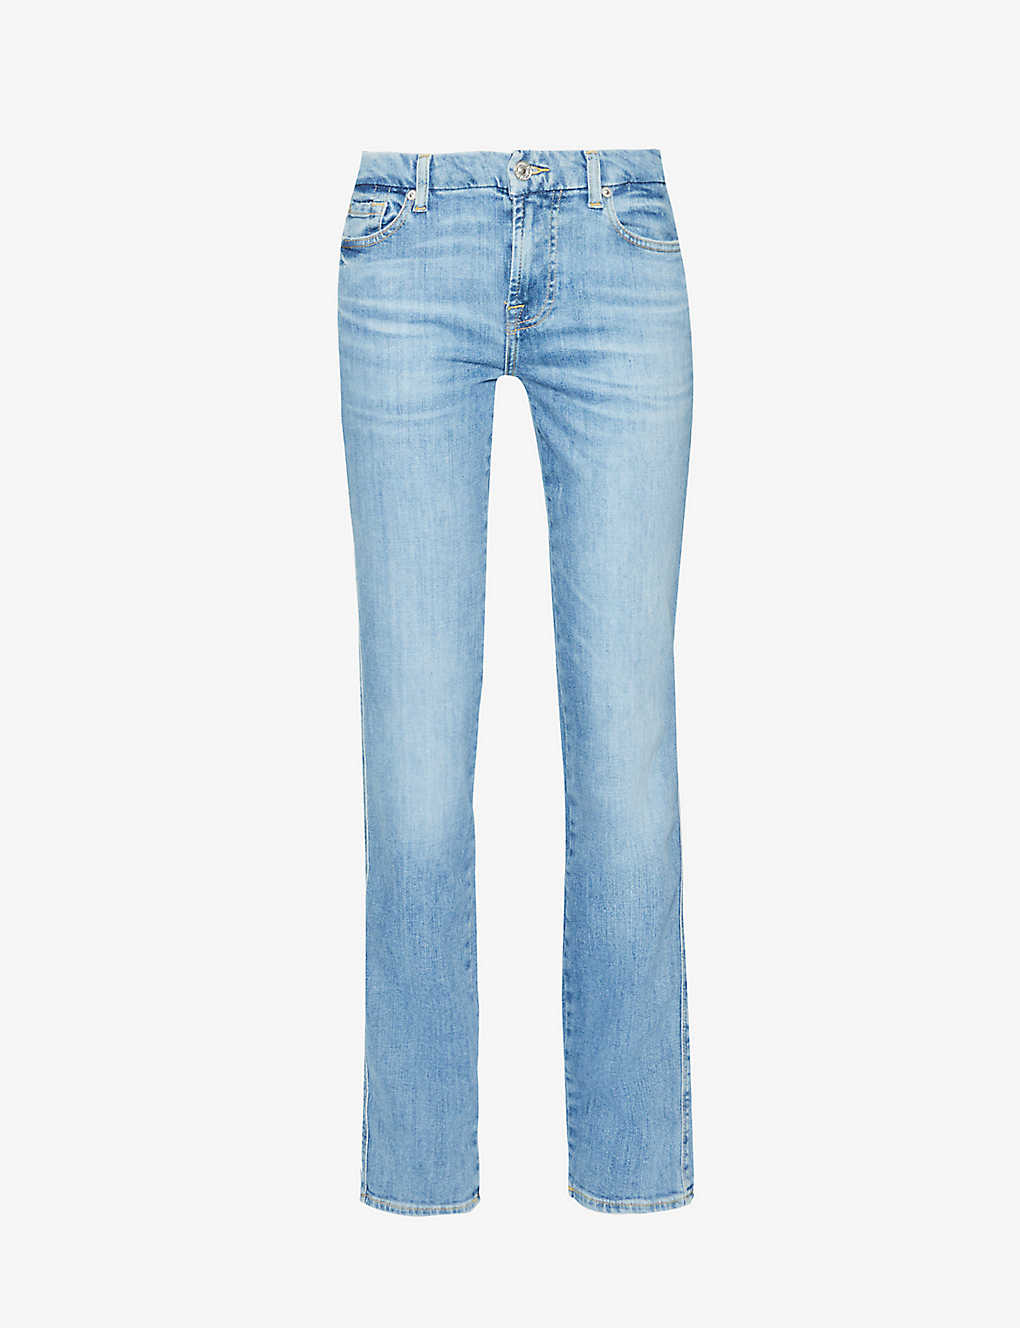 7 FOR ALL MANKIND 7 FOR ALL MANKIND WOMEN'S SLIM ILLUSION WITHIN KIMMIE STRAIGHT-LEG MID-RISE STRETCH-DENIM JEANS,66962992